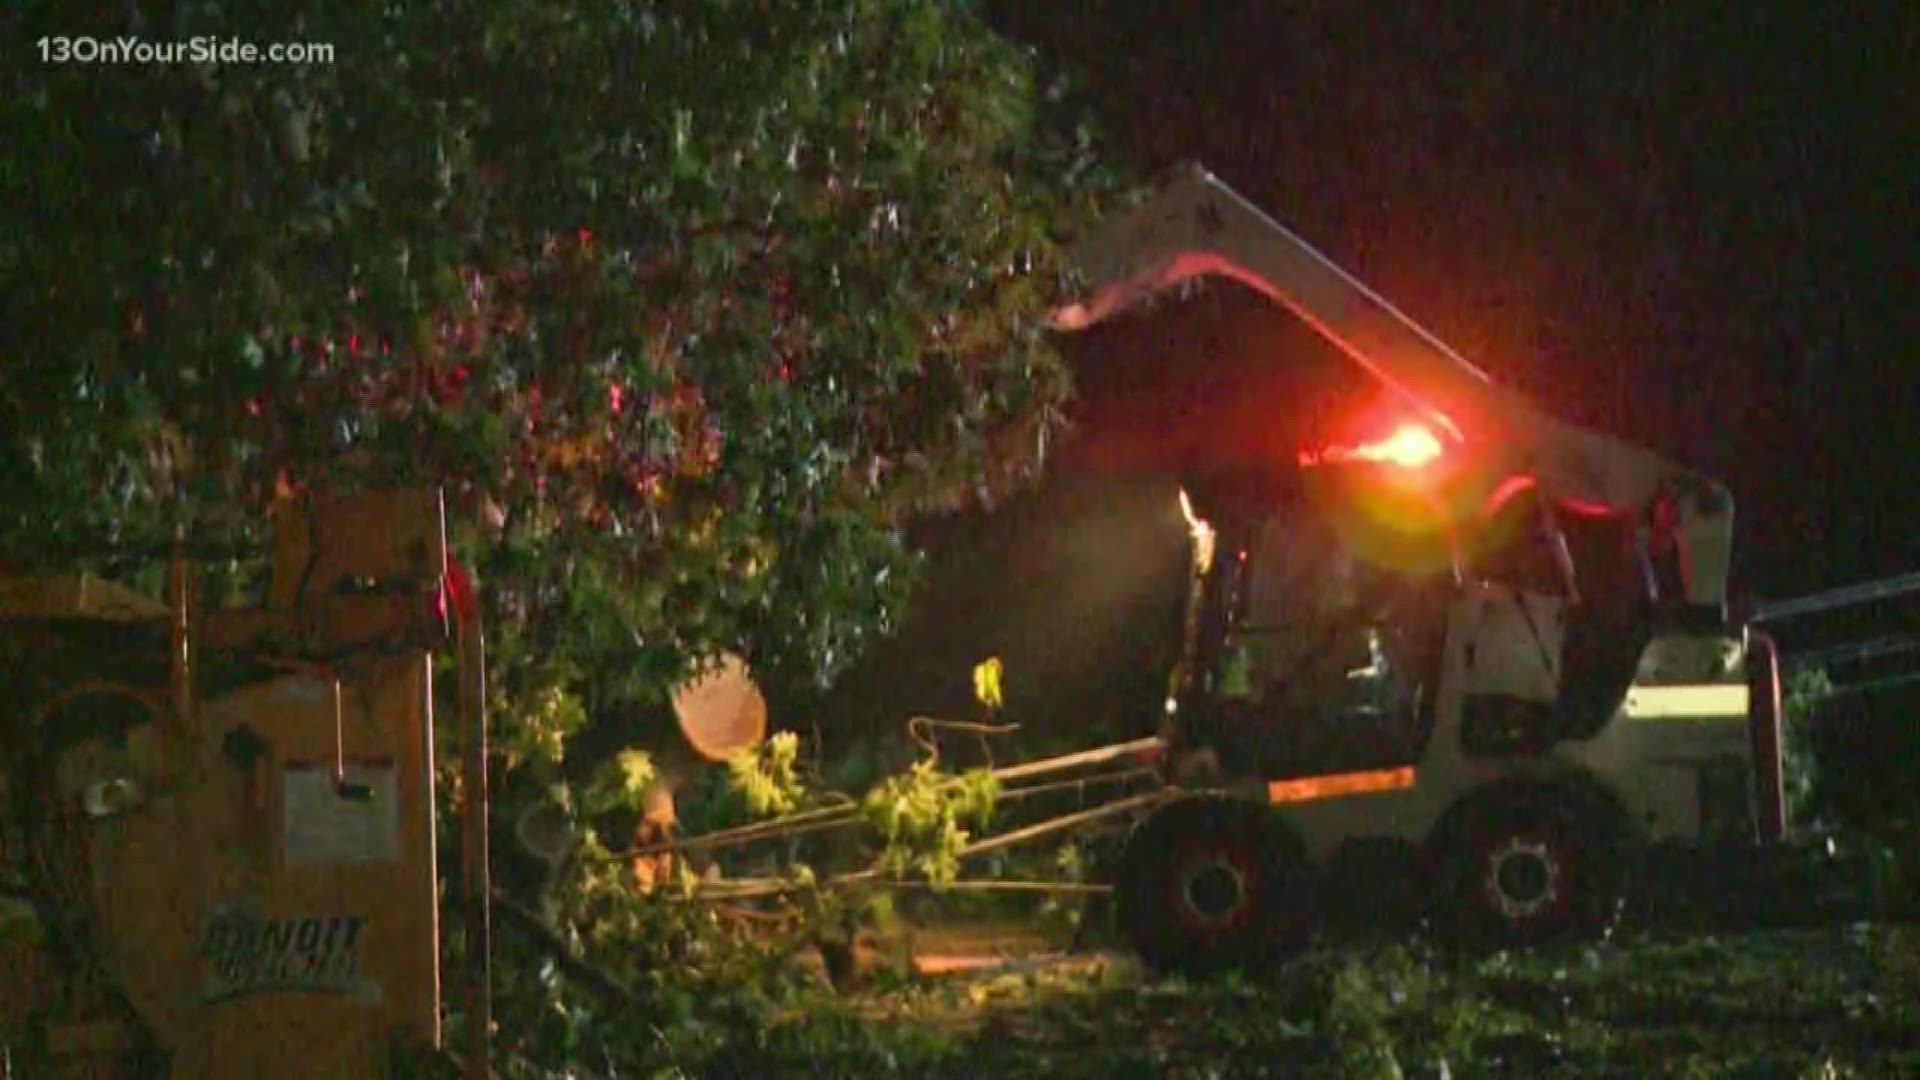 Damage left behind following severe storms Wednesday. 13 ON YOUR SIDE's James Starks was live in Grand Rapids taking a look at the updated power outage numbers and damage in the area.